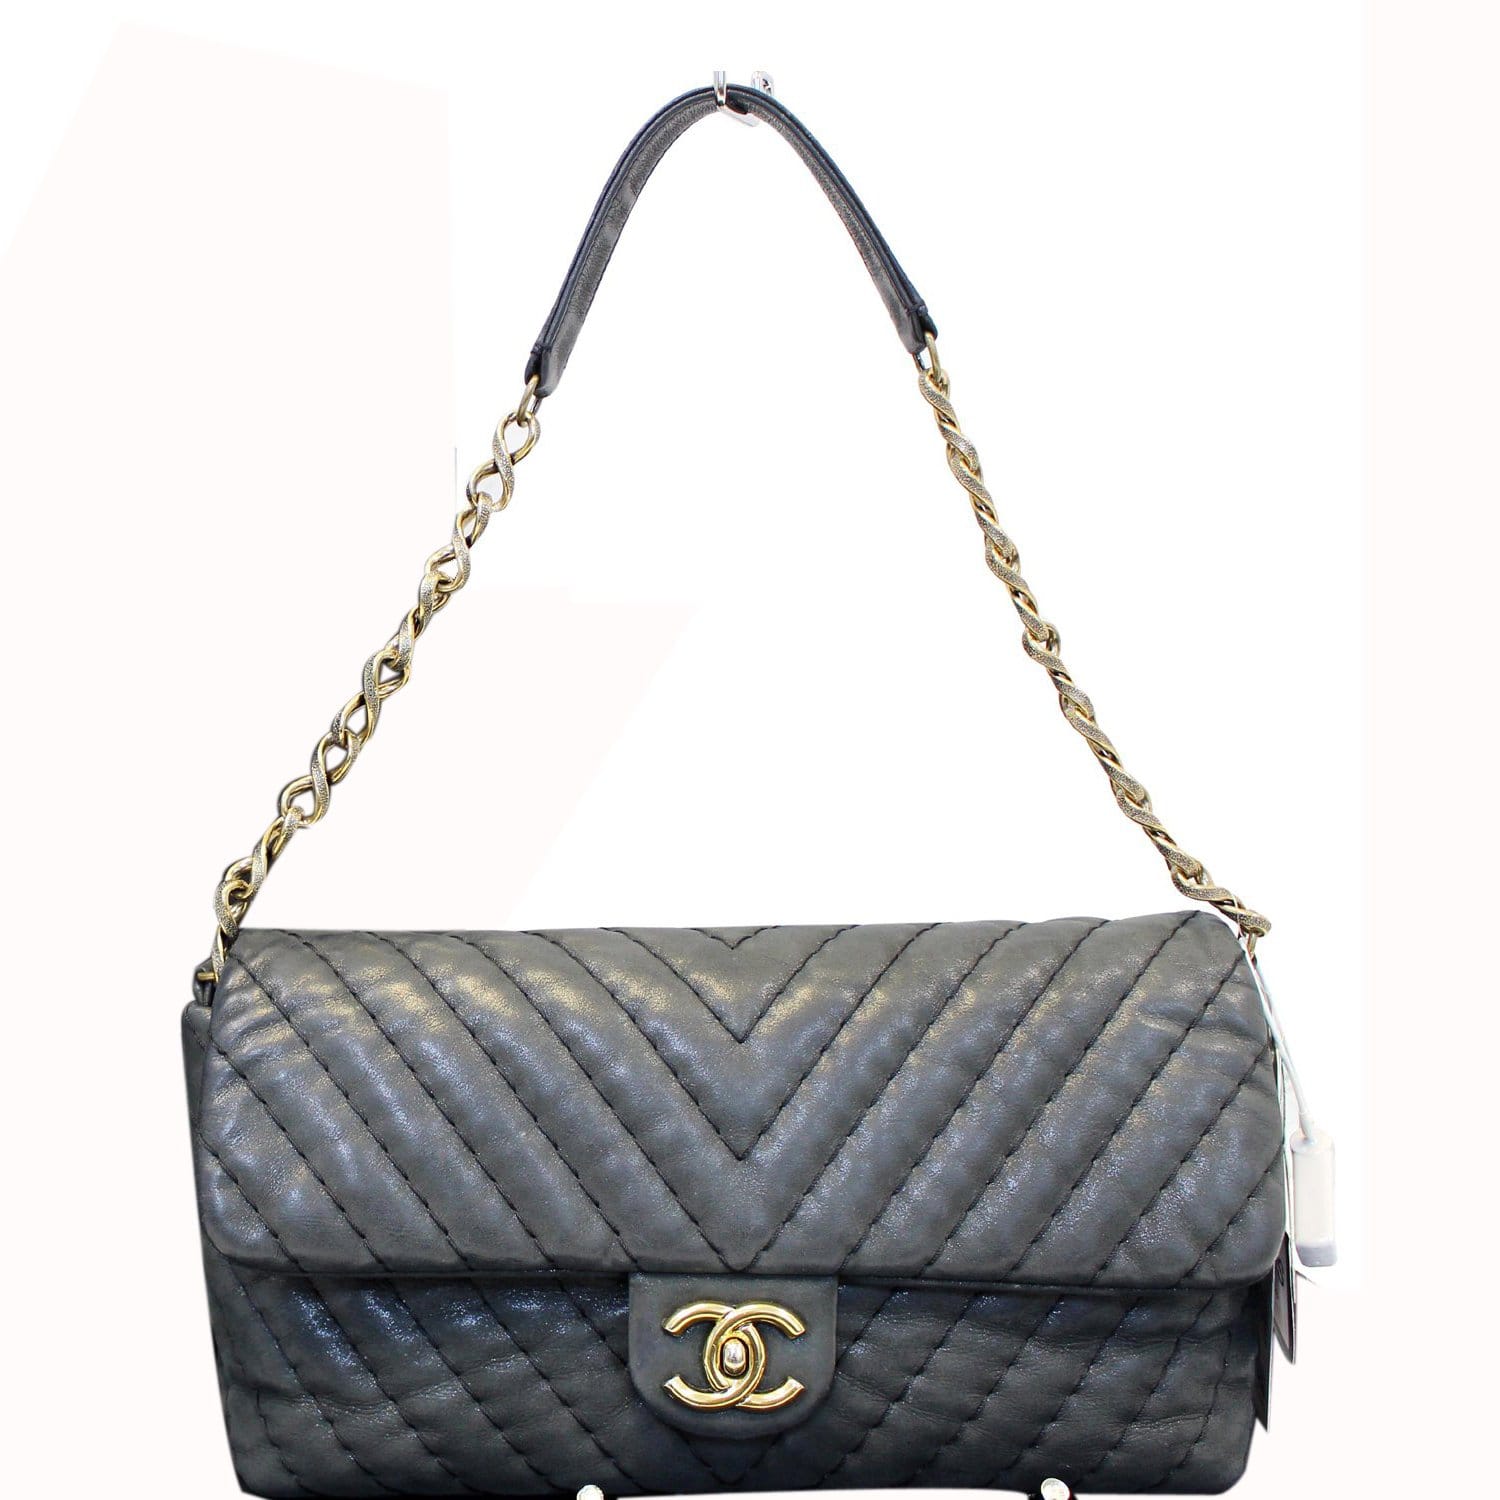 CHANEL Wrinkled Lamb Skin Leather Chevron Quilted Surpique Light Gray Tote  Bag